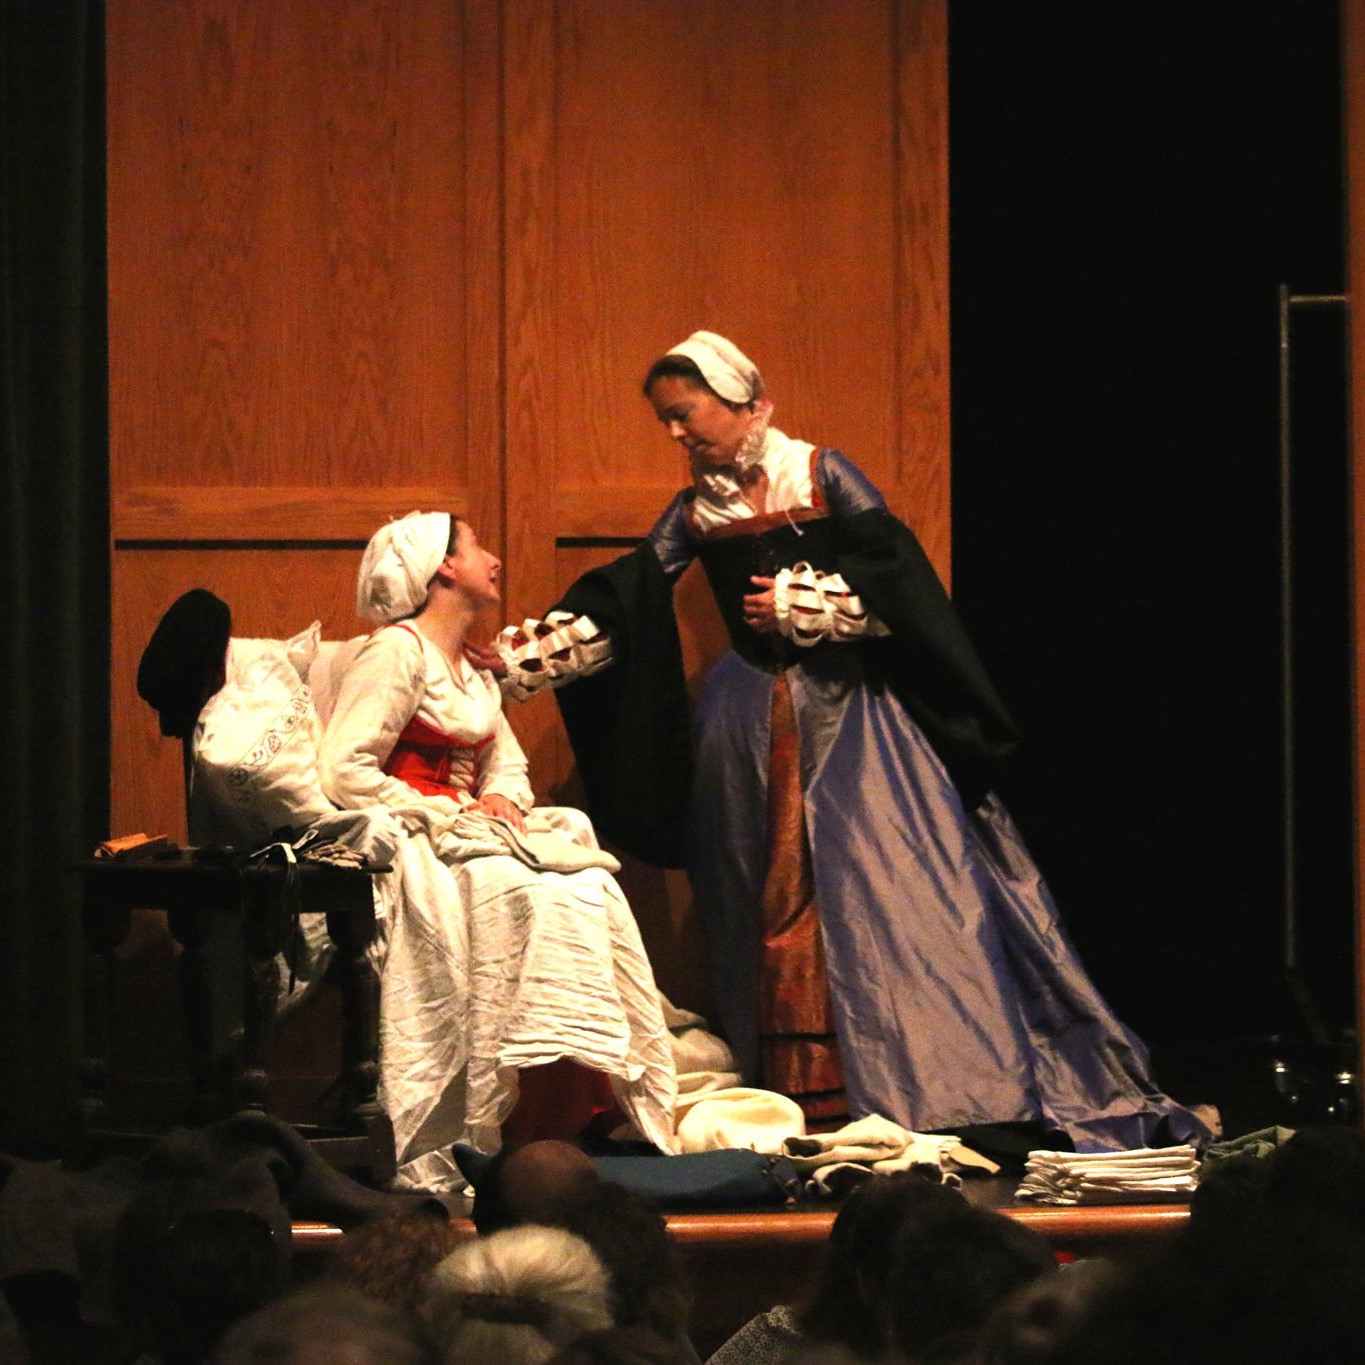 A dramatic performance by the members of Tudor Tailor in period costumes